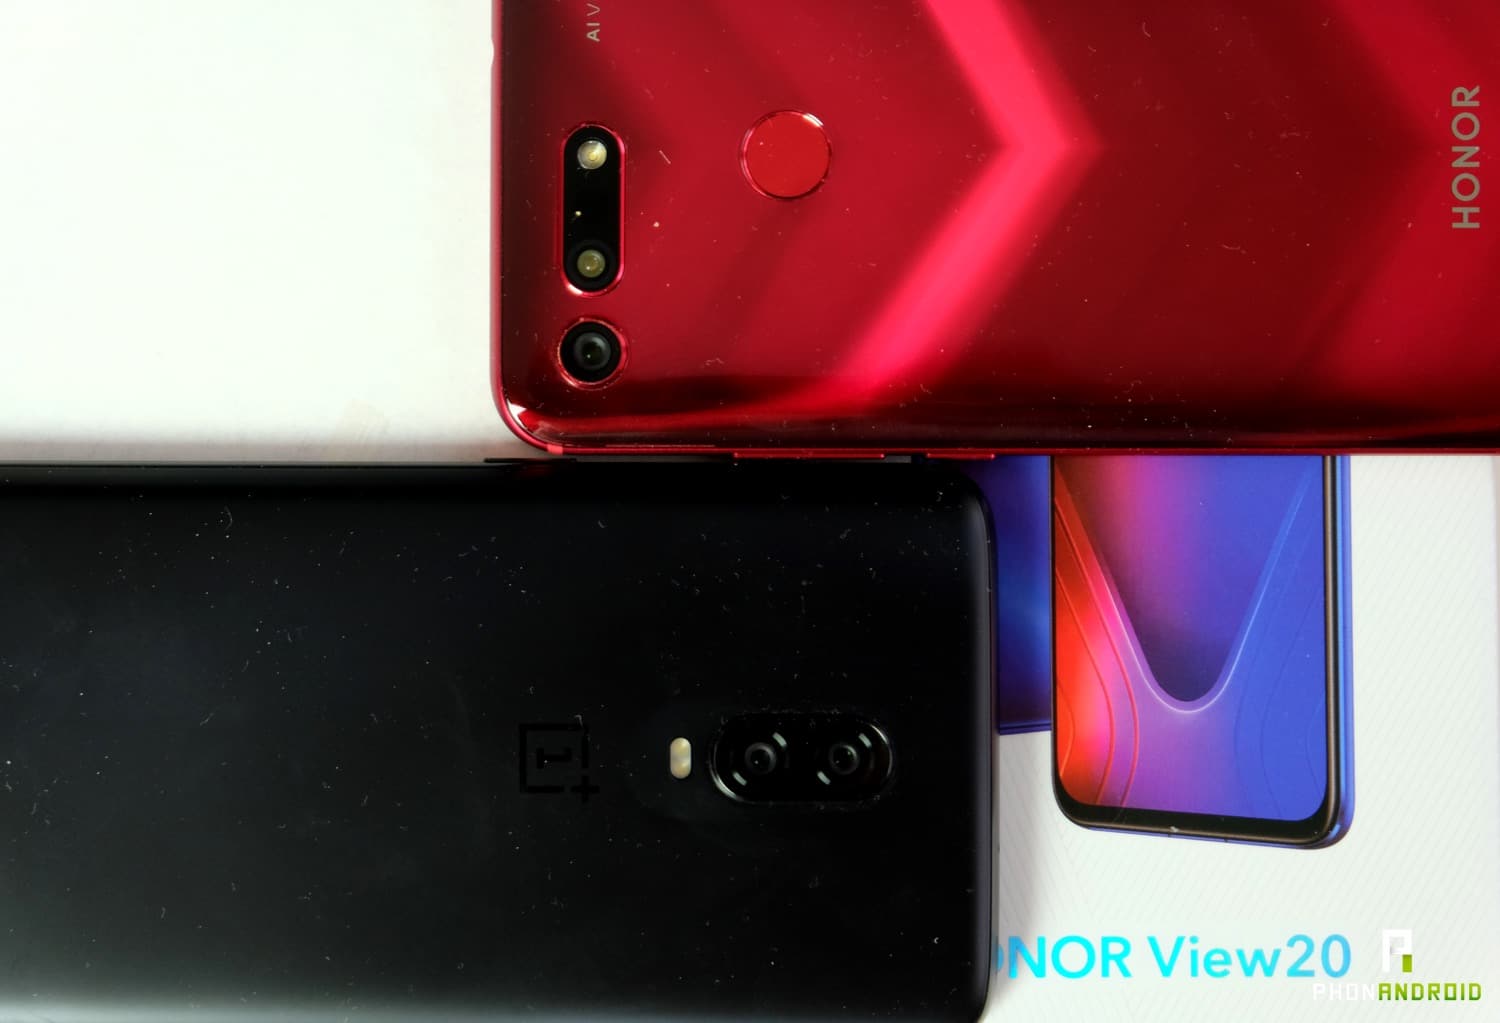 comparatif honor view 20 OnePlus 6t appareil photo